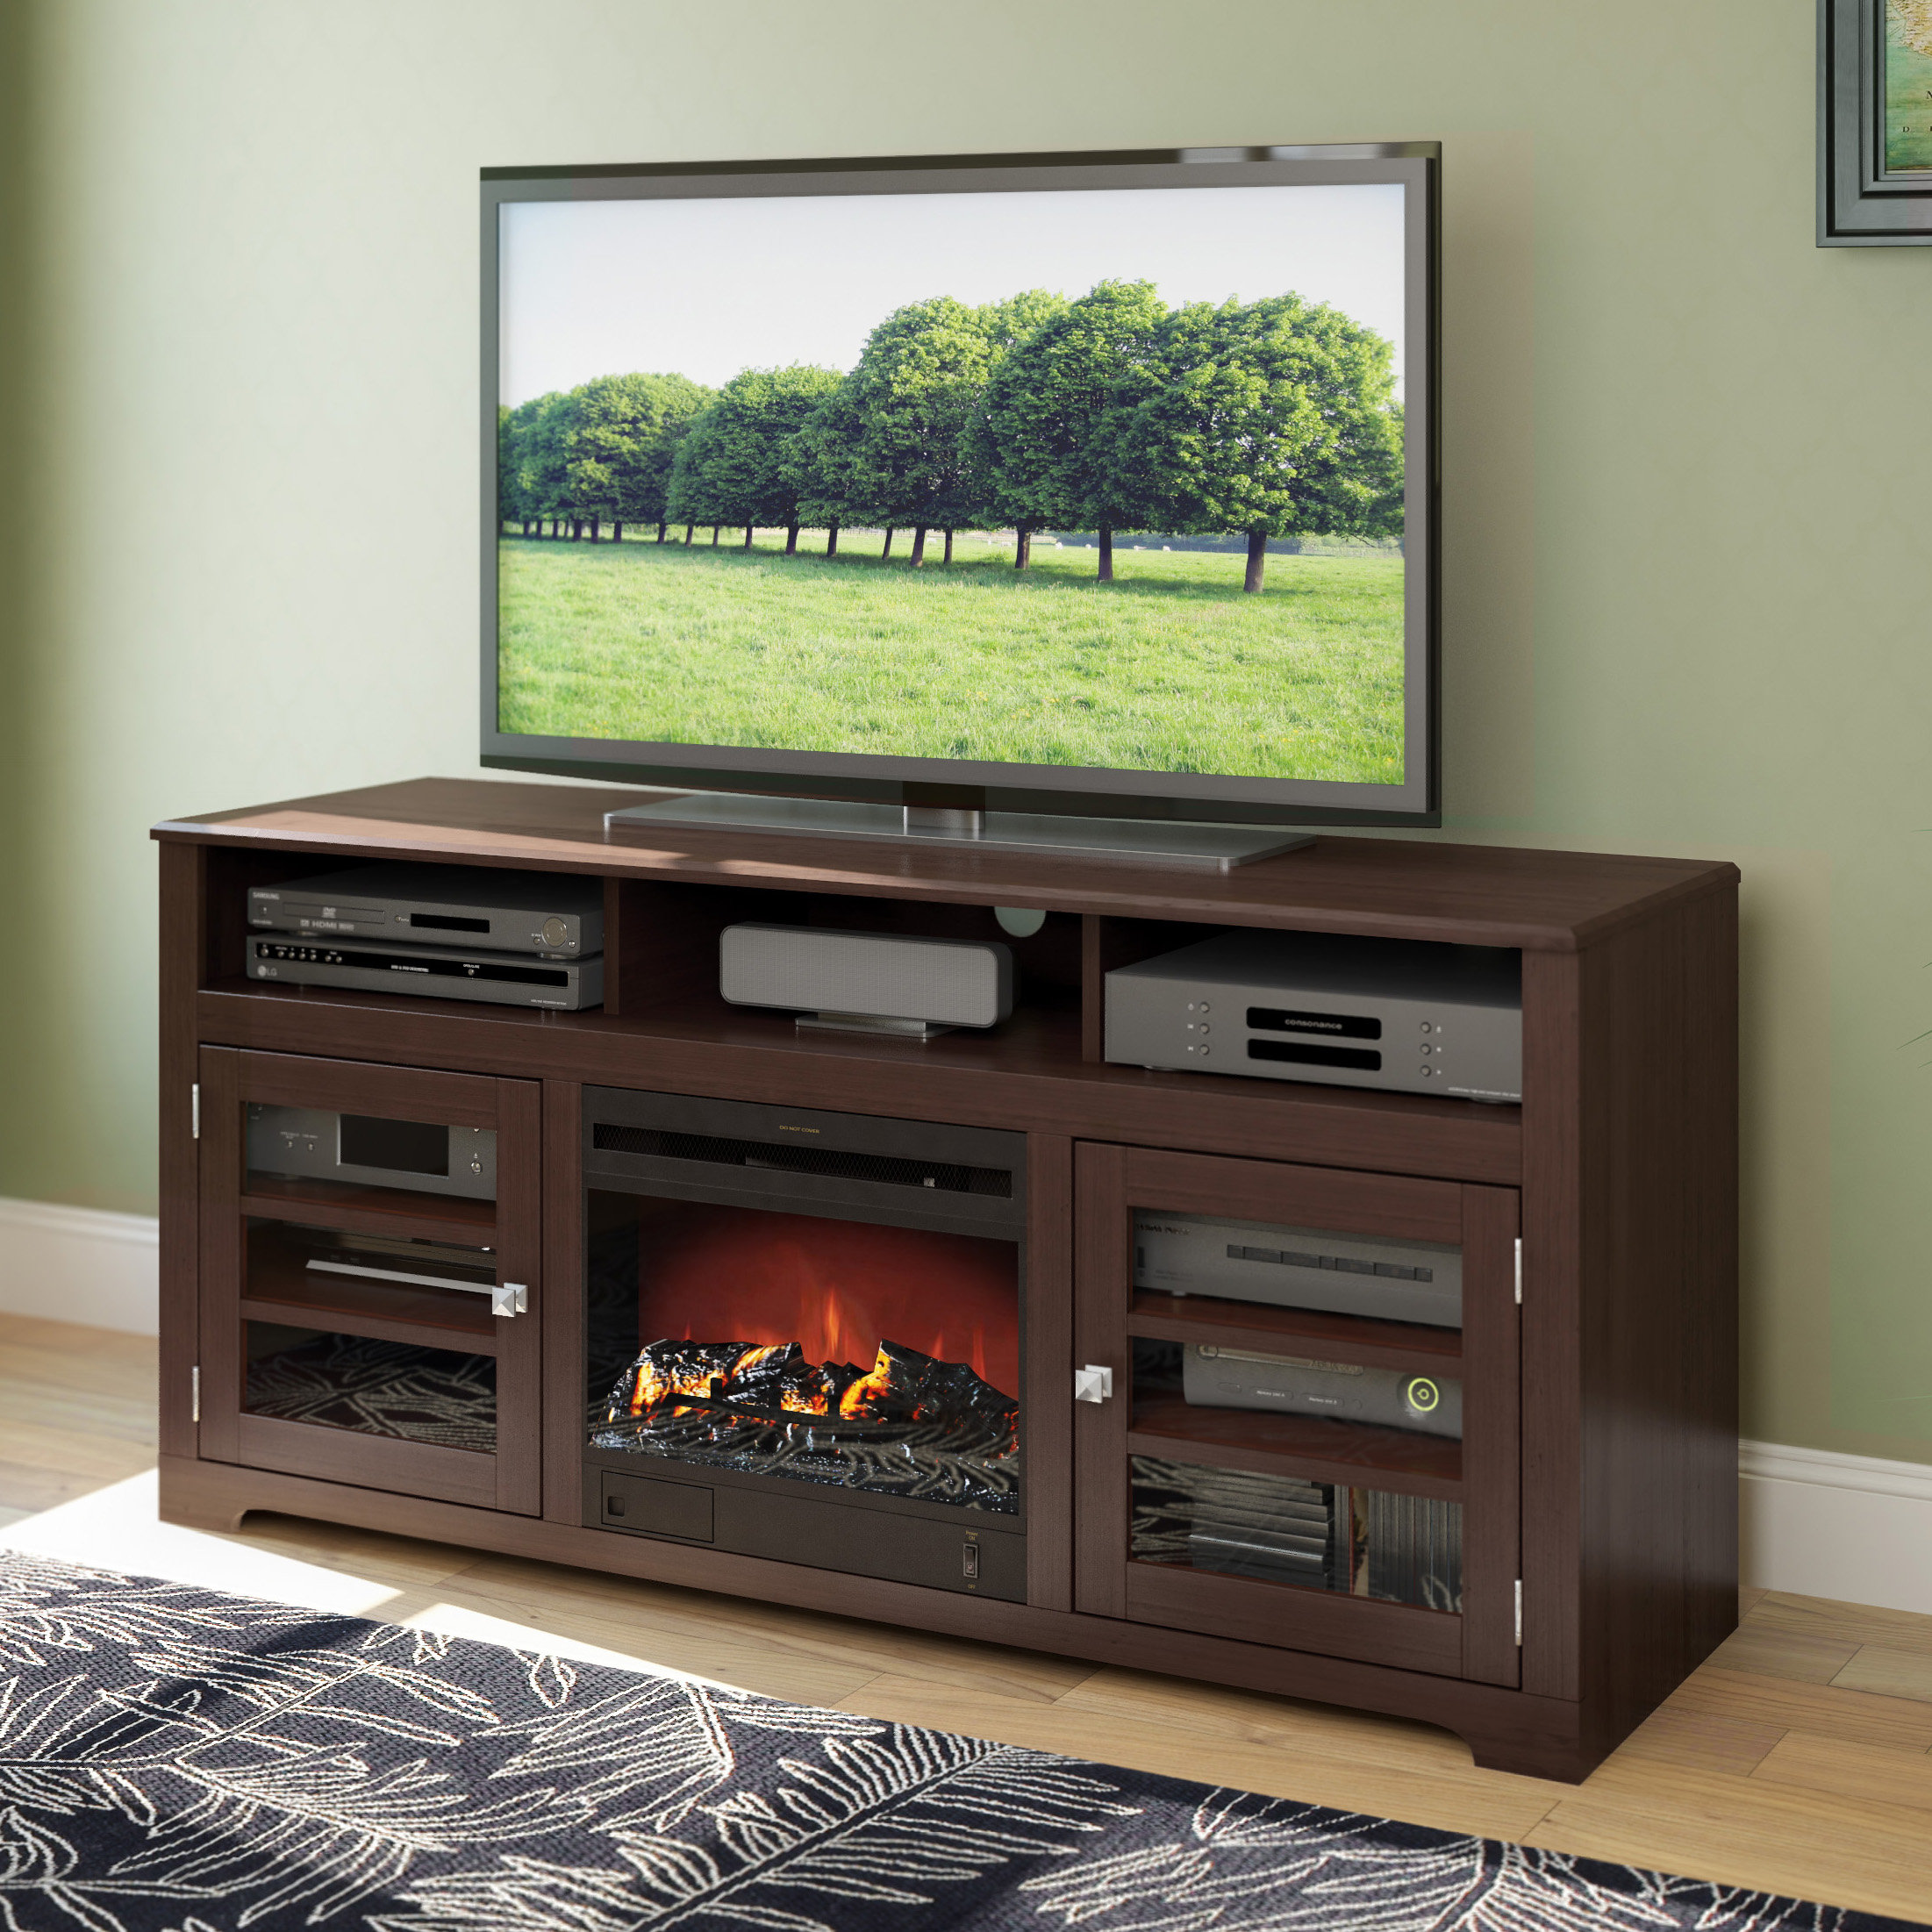 Ivy Bronx Robbin Tv Stand For Tvs Up To 65 Inches With Electric